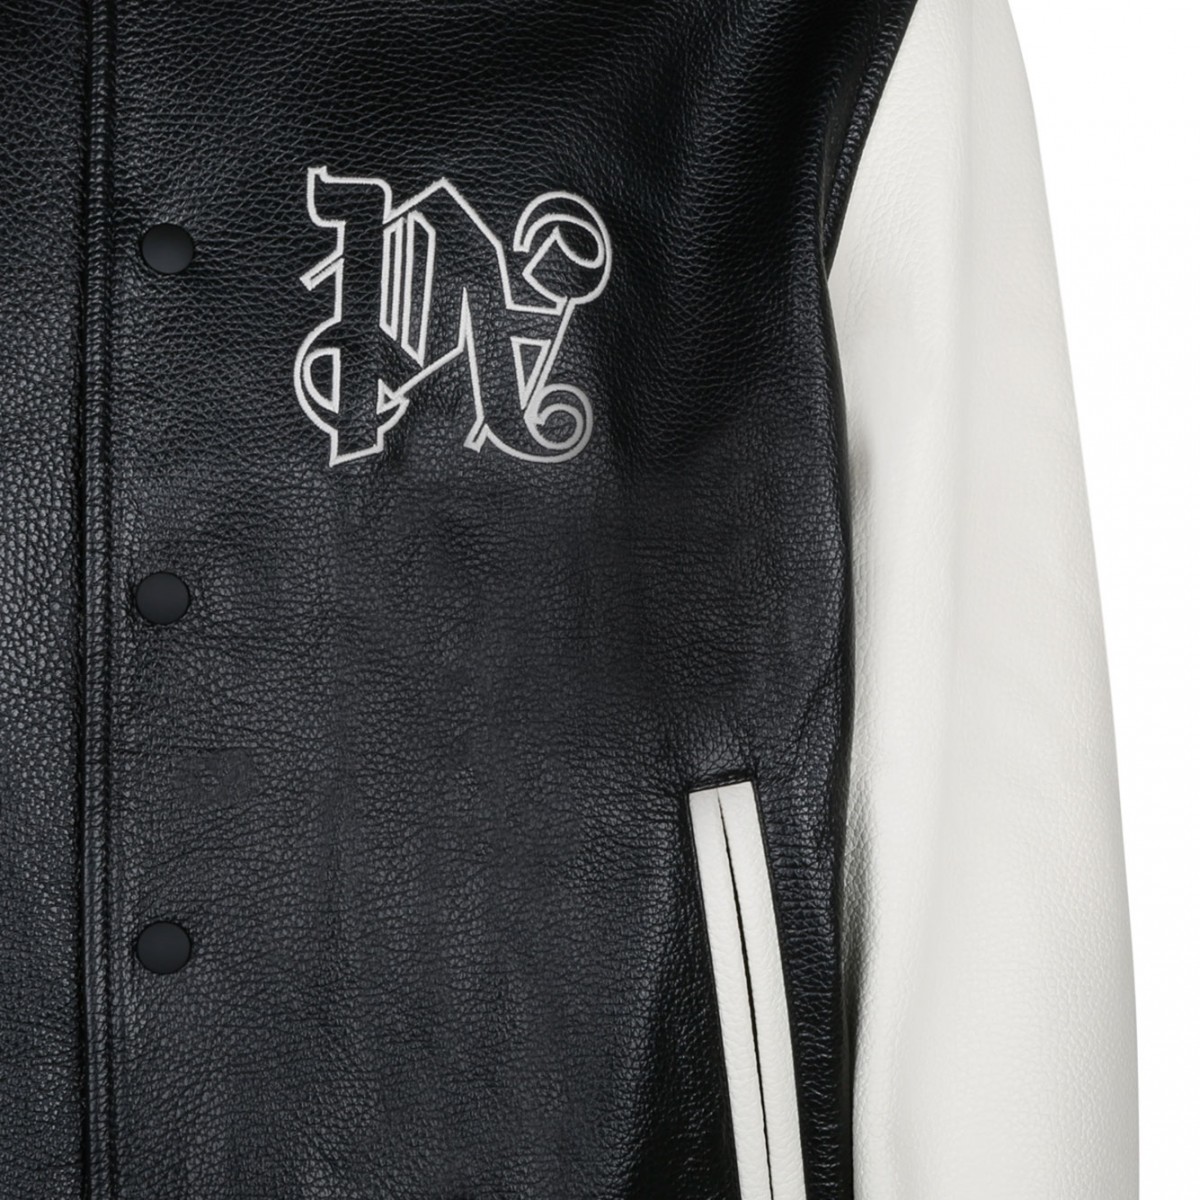 Black and Off White Leather Varsity Jacket| COLOGNESE 1882